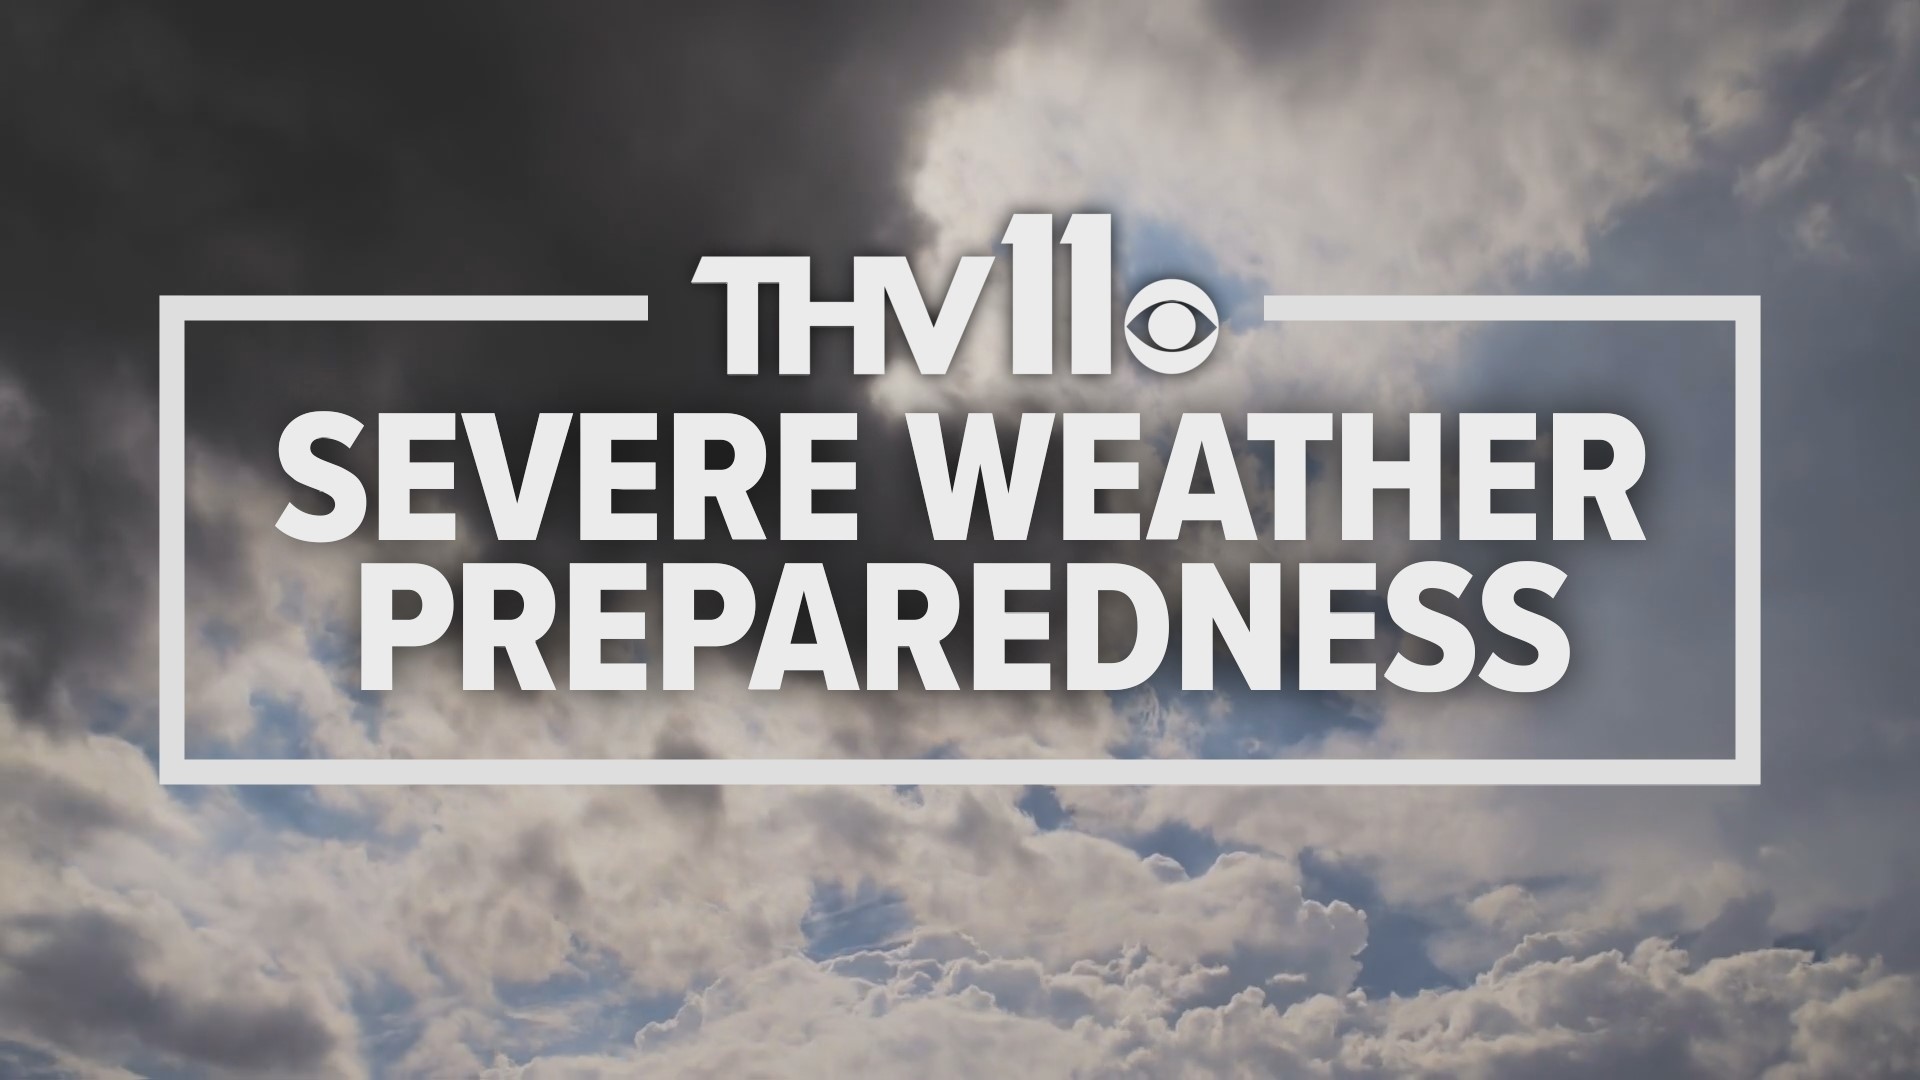 Our goal at THV11 is to help prepare you in the event that severe weather is expected where you live— so our meteorologists broke down all you may need to know.